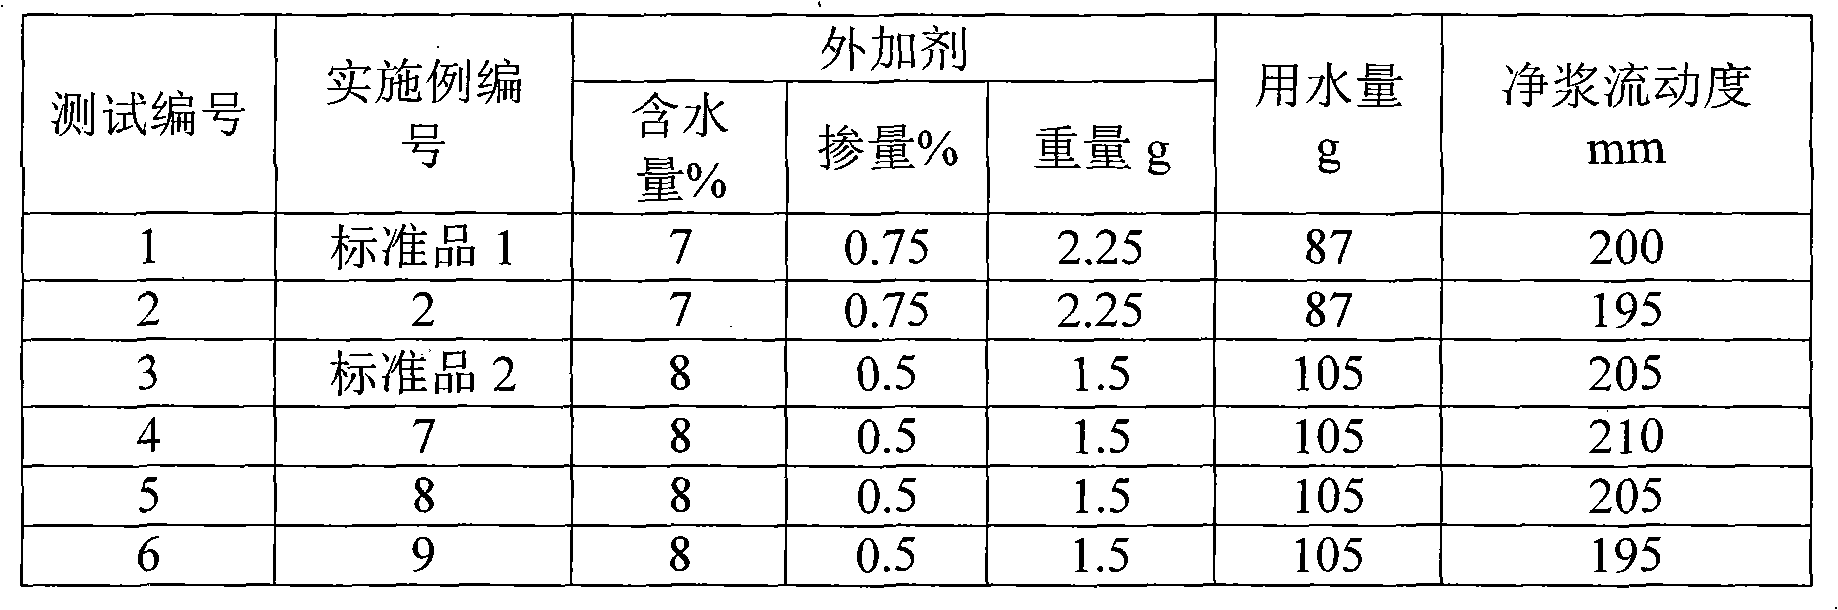 Sulfonation process for producing dye dispersant and concrete water reducing agent